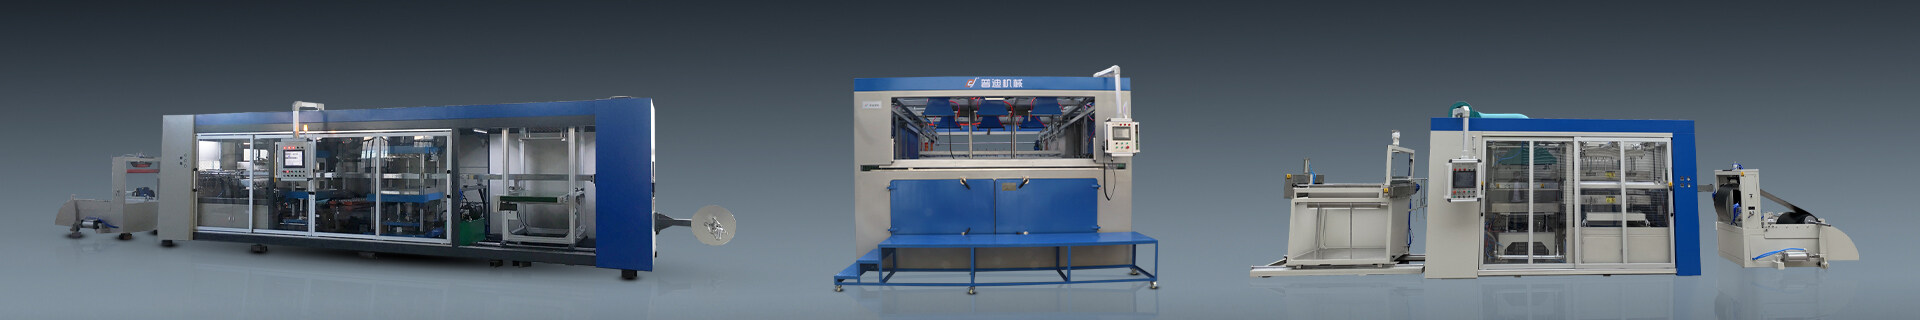 thermoforming machine components, parts of a vacuum forming machine, thermoforming molds, blister injection molding, thermoform molding